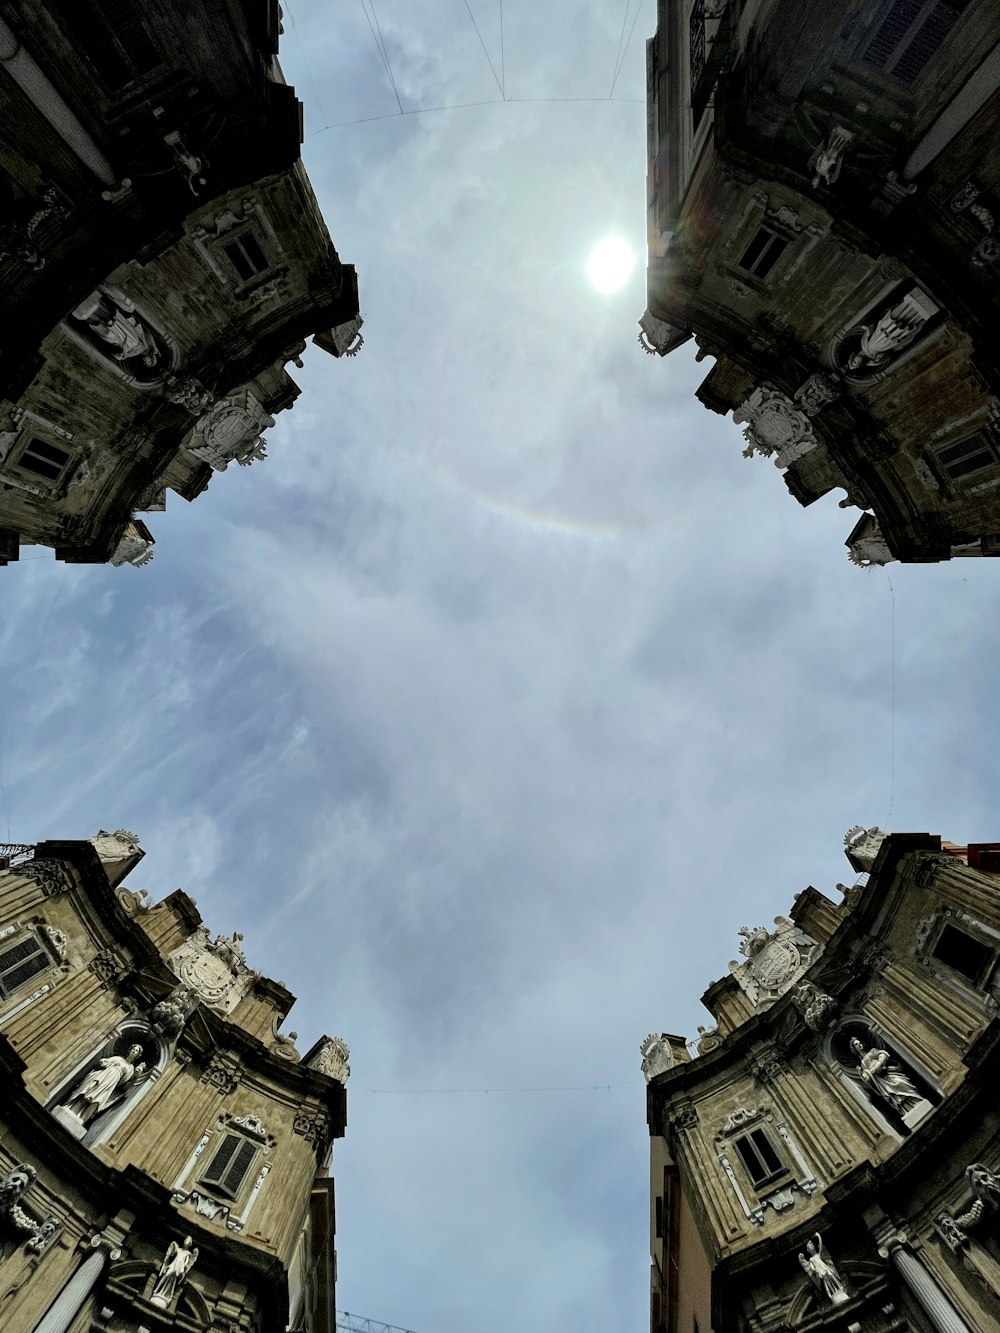 looking up at a tall building with a rainbow in the sky